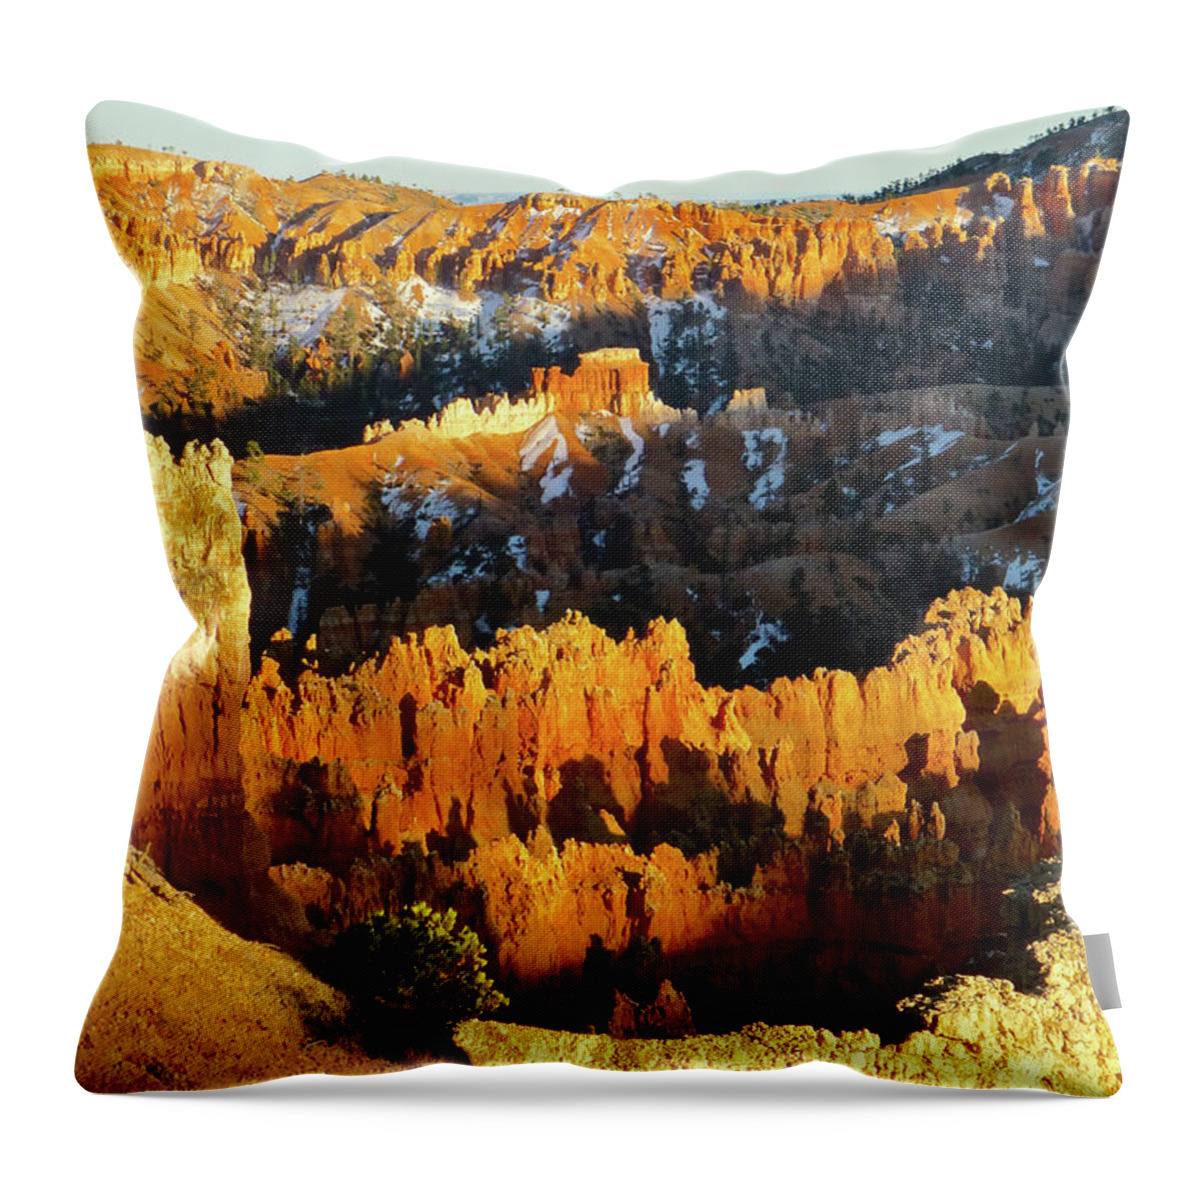 Bryce Canyon Throw Pillow featuring the photograph Bryce Canyon Hoodoos evening by Amelia Racca